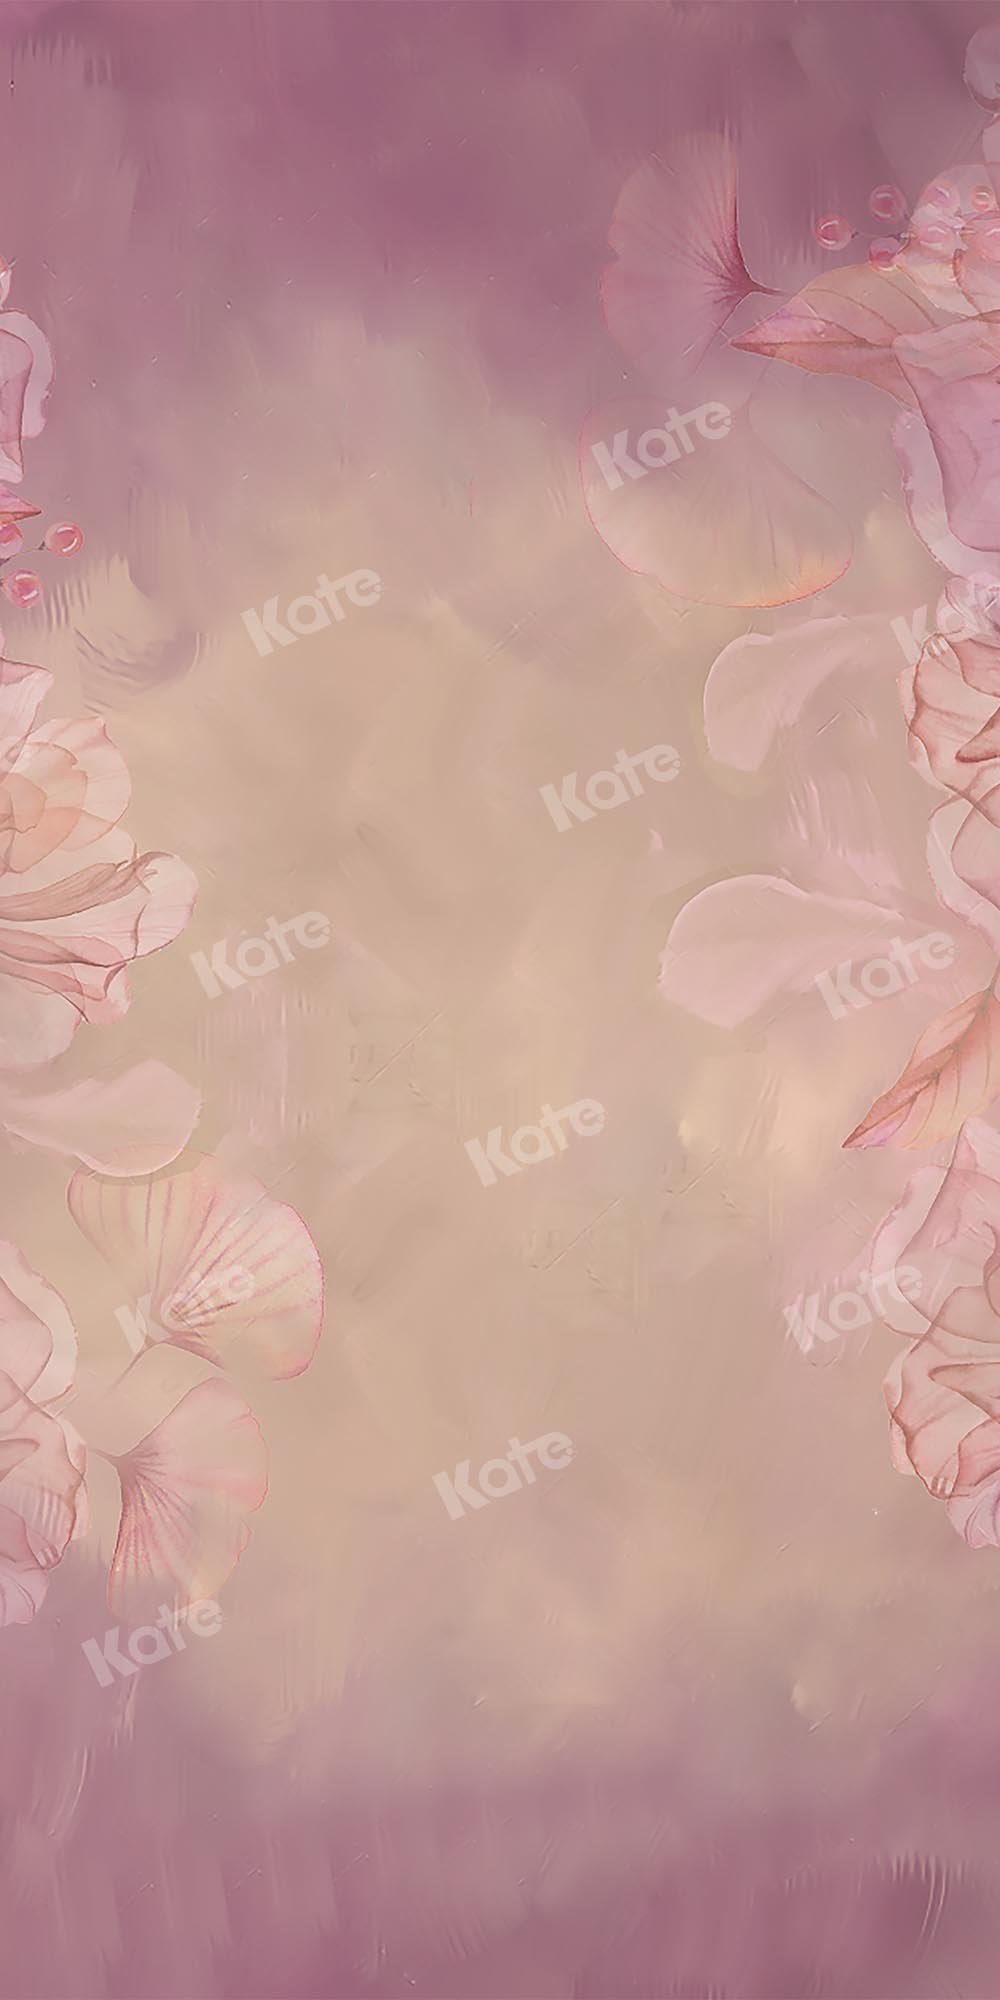 Kate Fine Art Floral Blurry Pink Backdrop Designed by GQ